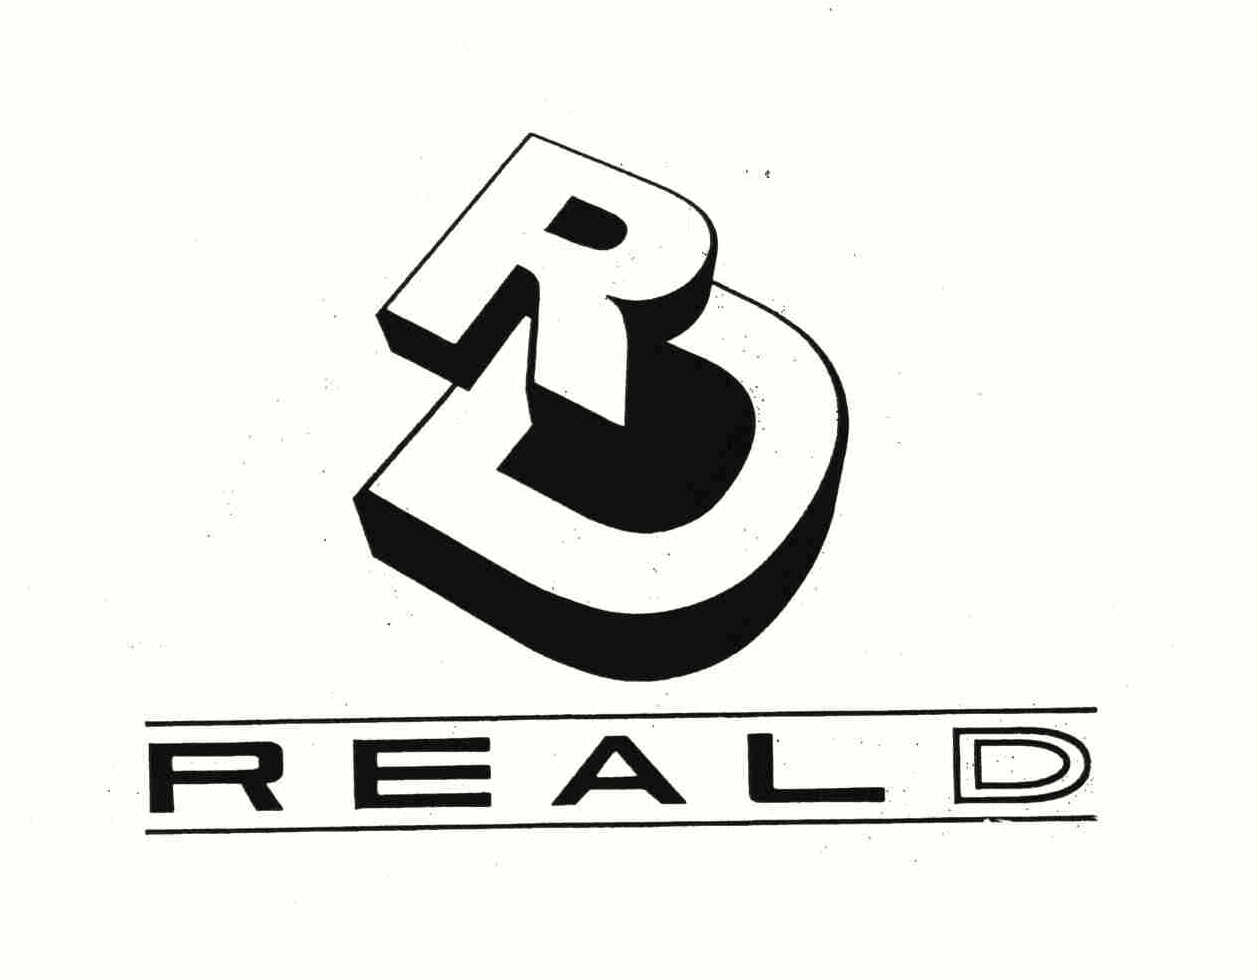  RD REAL D